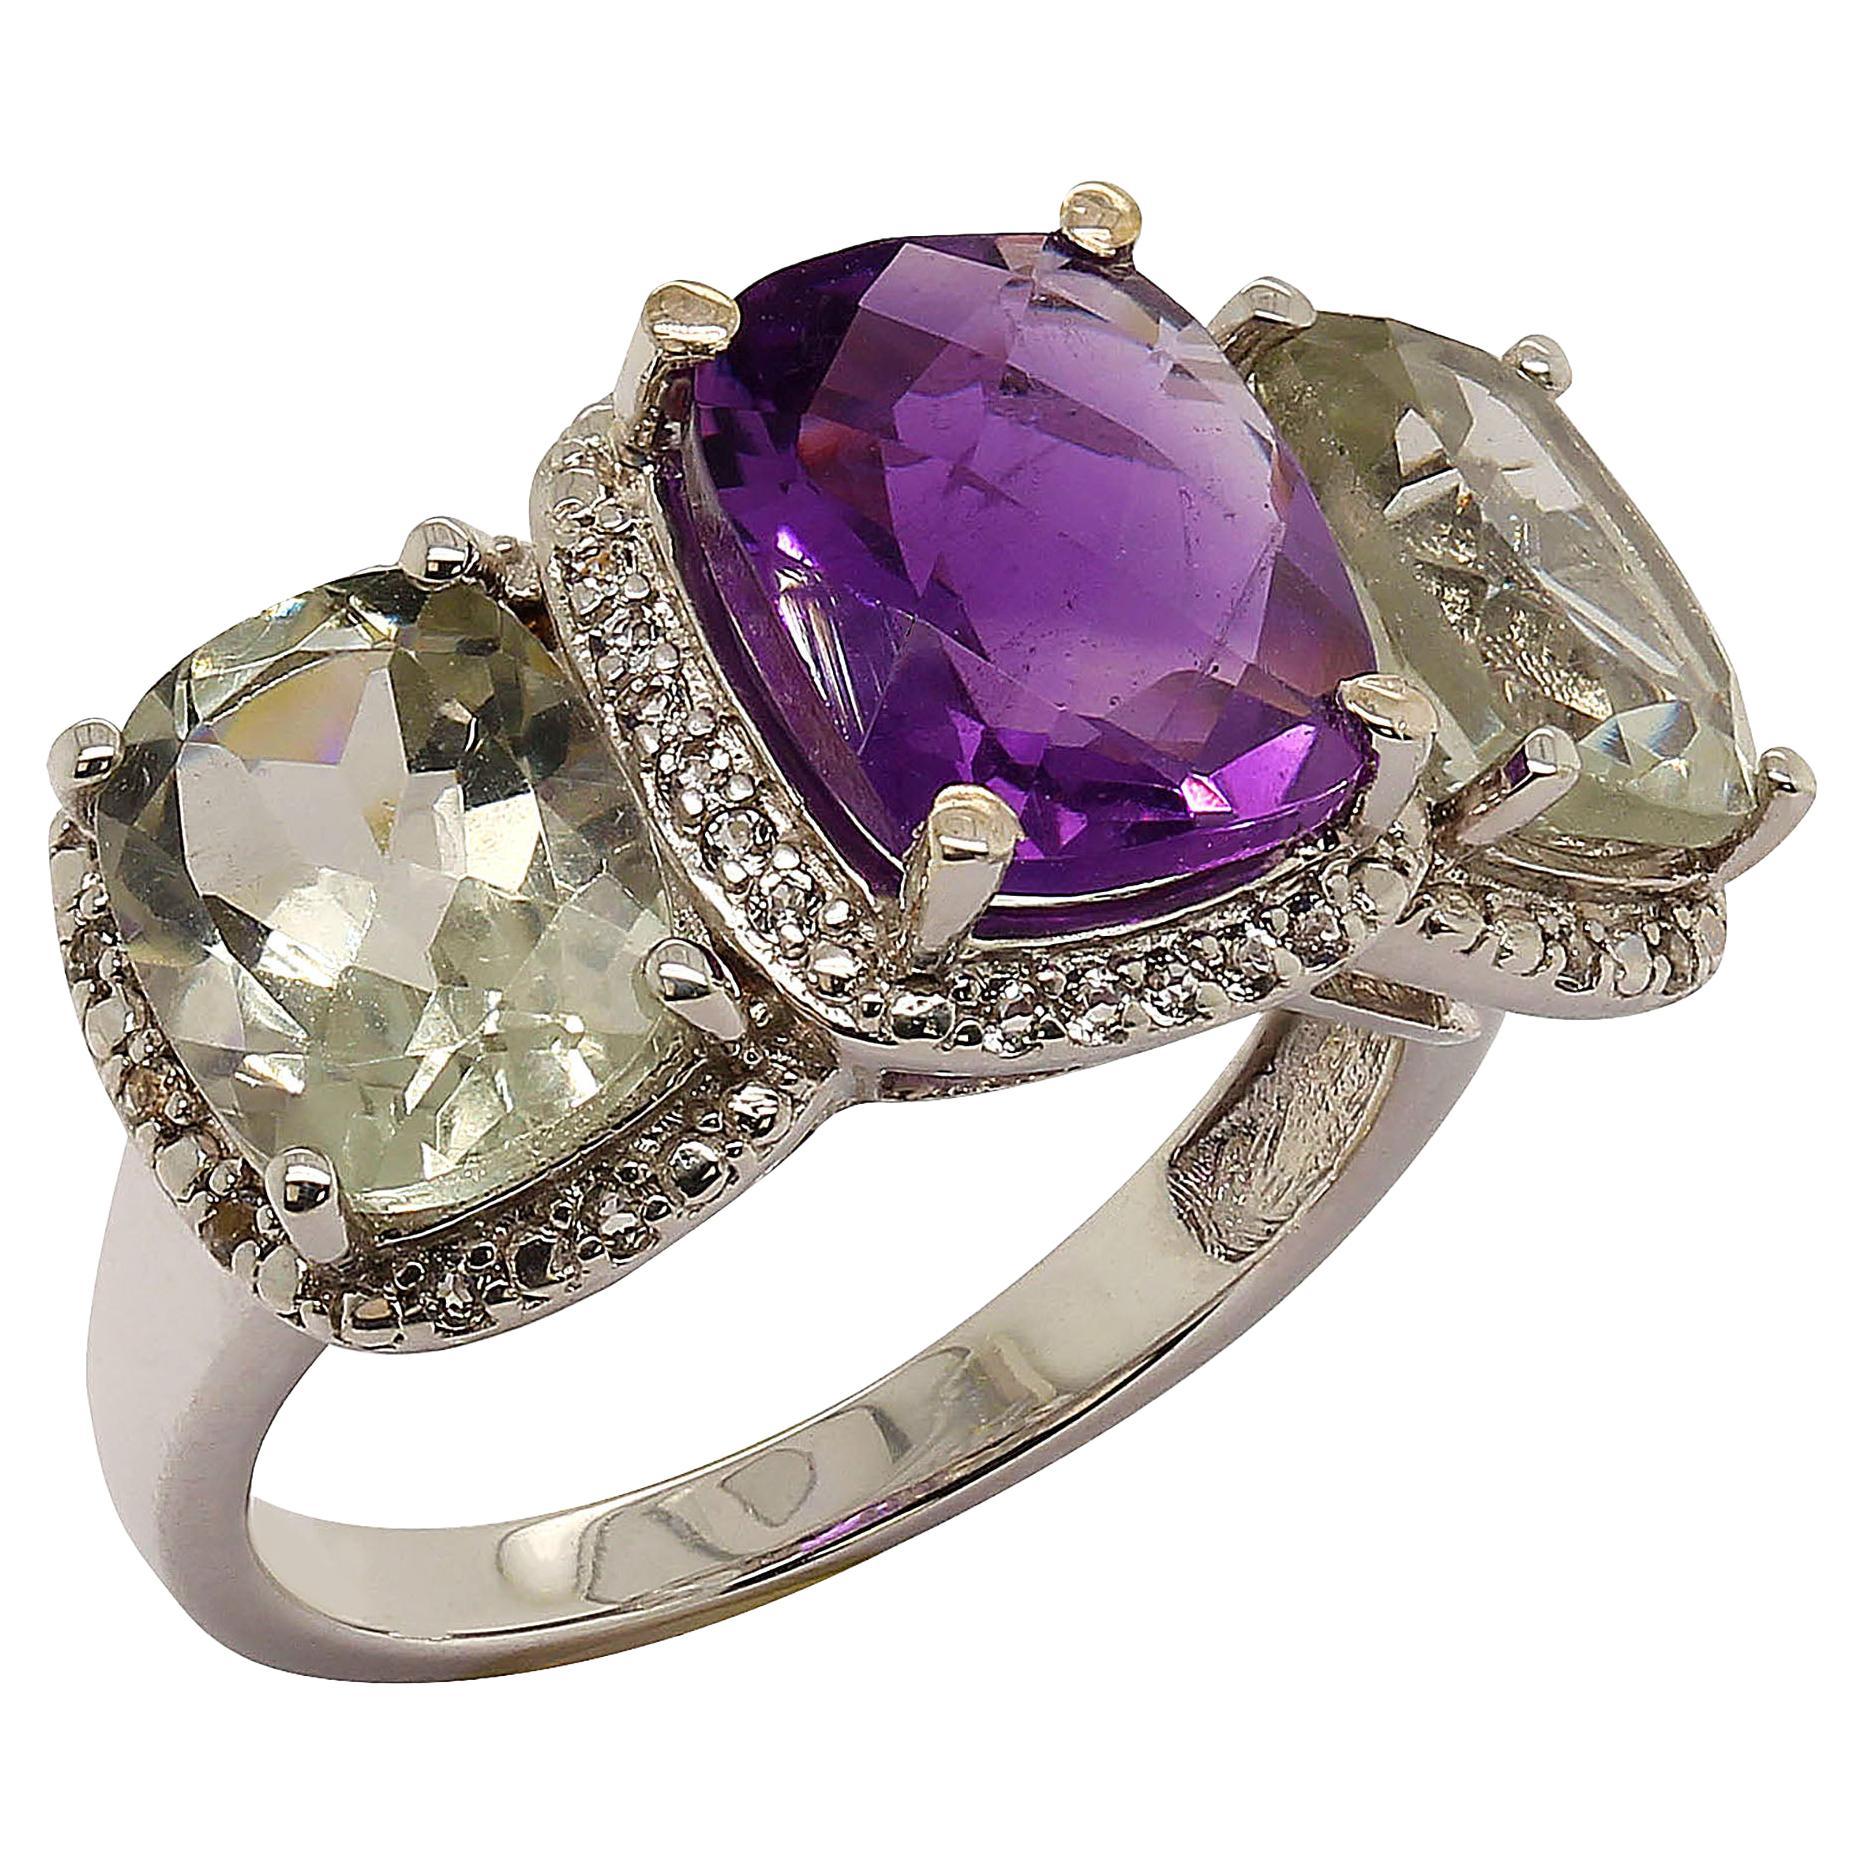 Custom designed striking three gemstone ring featuring a checkerboard cushion cut Amethyst center stone.  The side stones which equal 4. 52ct are sparkling green Praziolites, also cushion cuts.  Each gemstone is surrounded by a halo of granulated